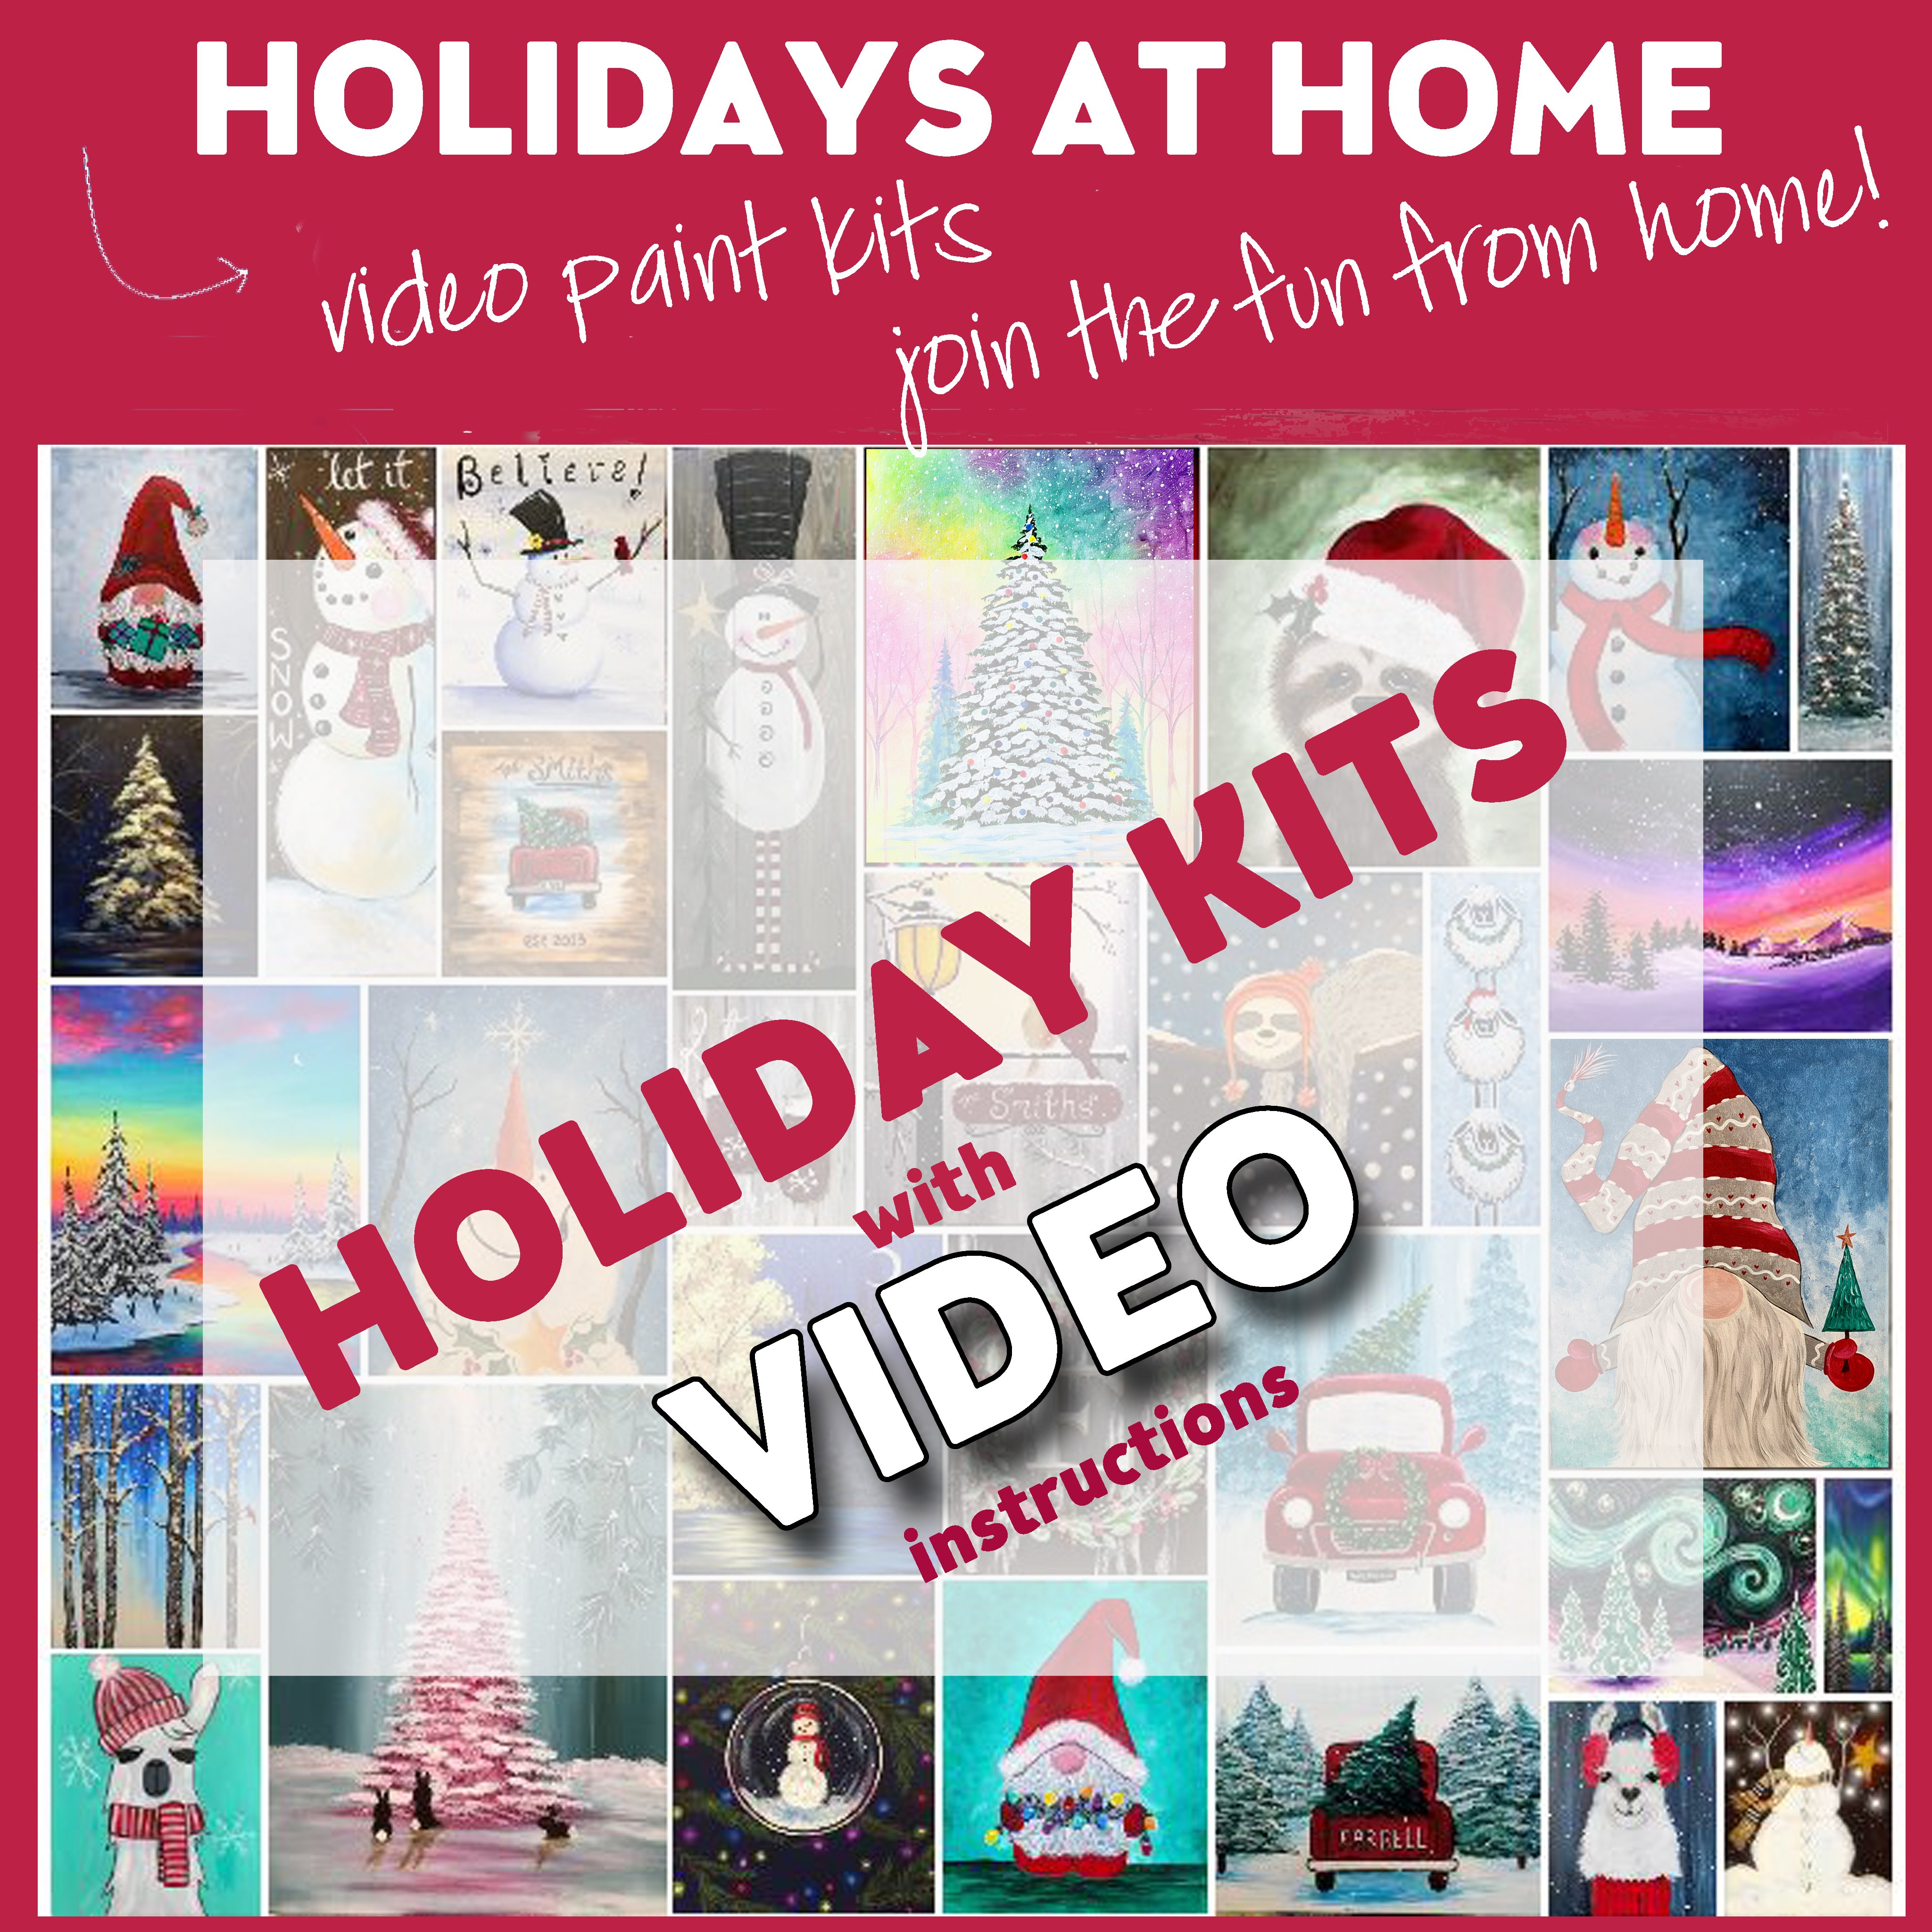 Christmas at home VIDEO placemarker005